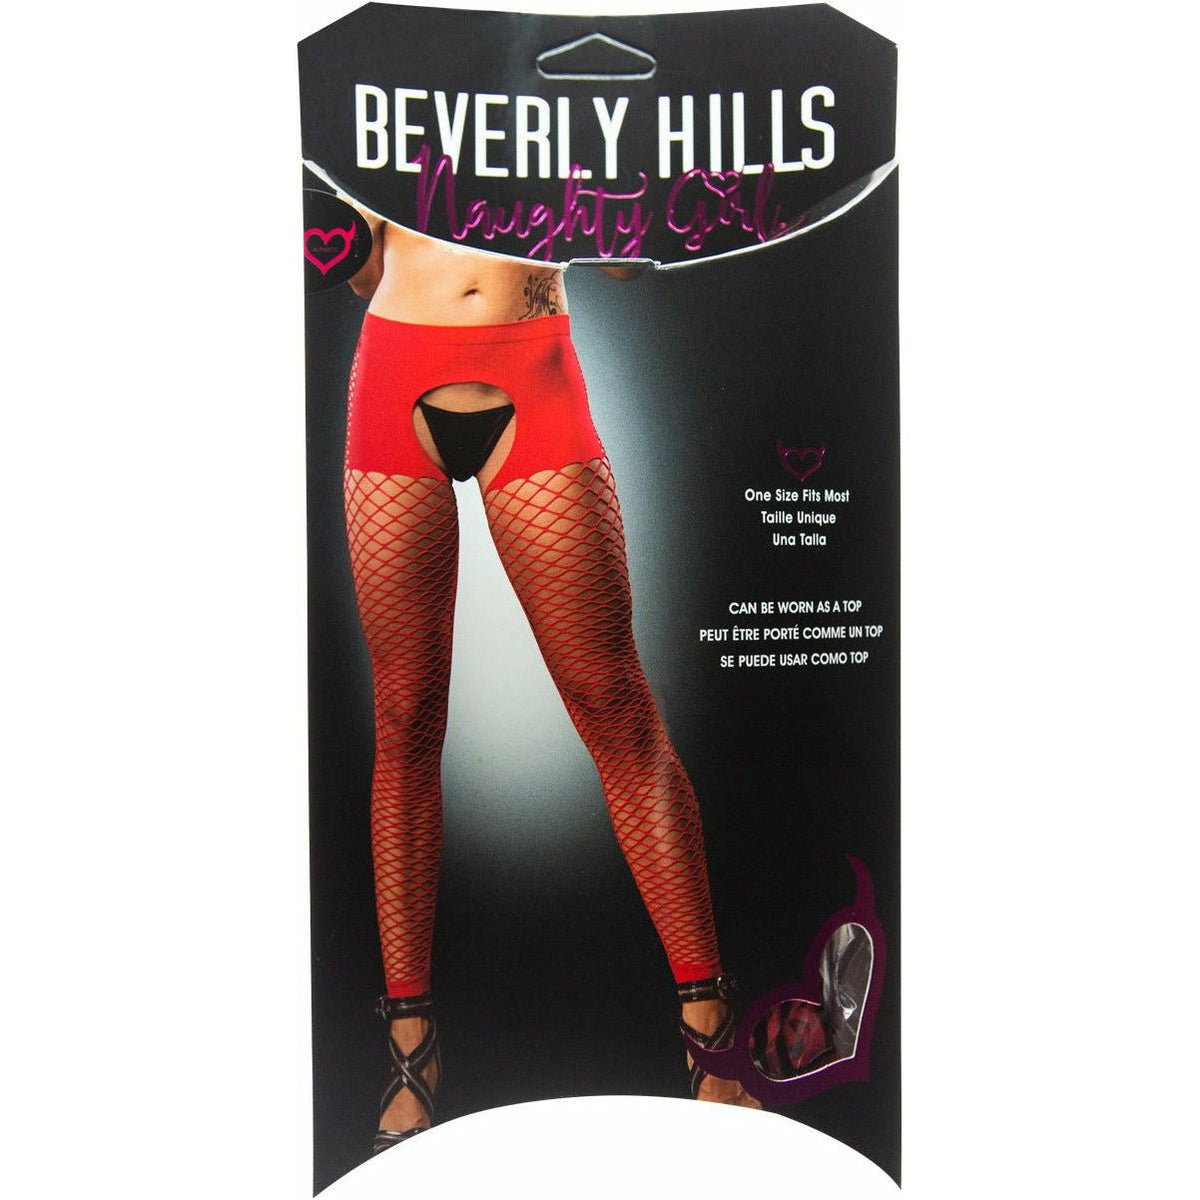 Beverly Hills Naughty Girl -  Crotchless Short with Mesh Bottom Leggings - Red - One Size